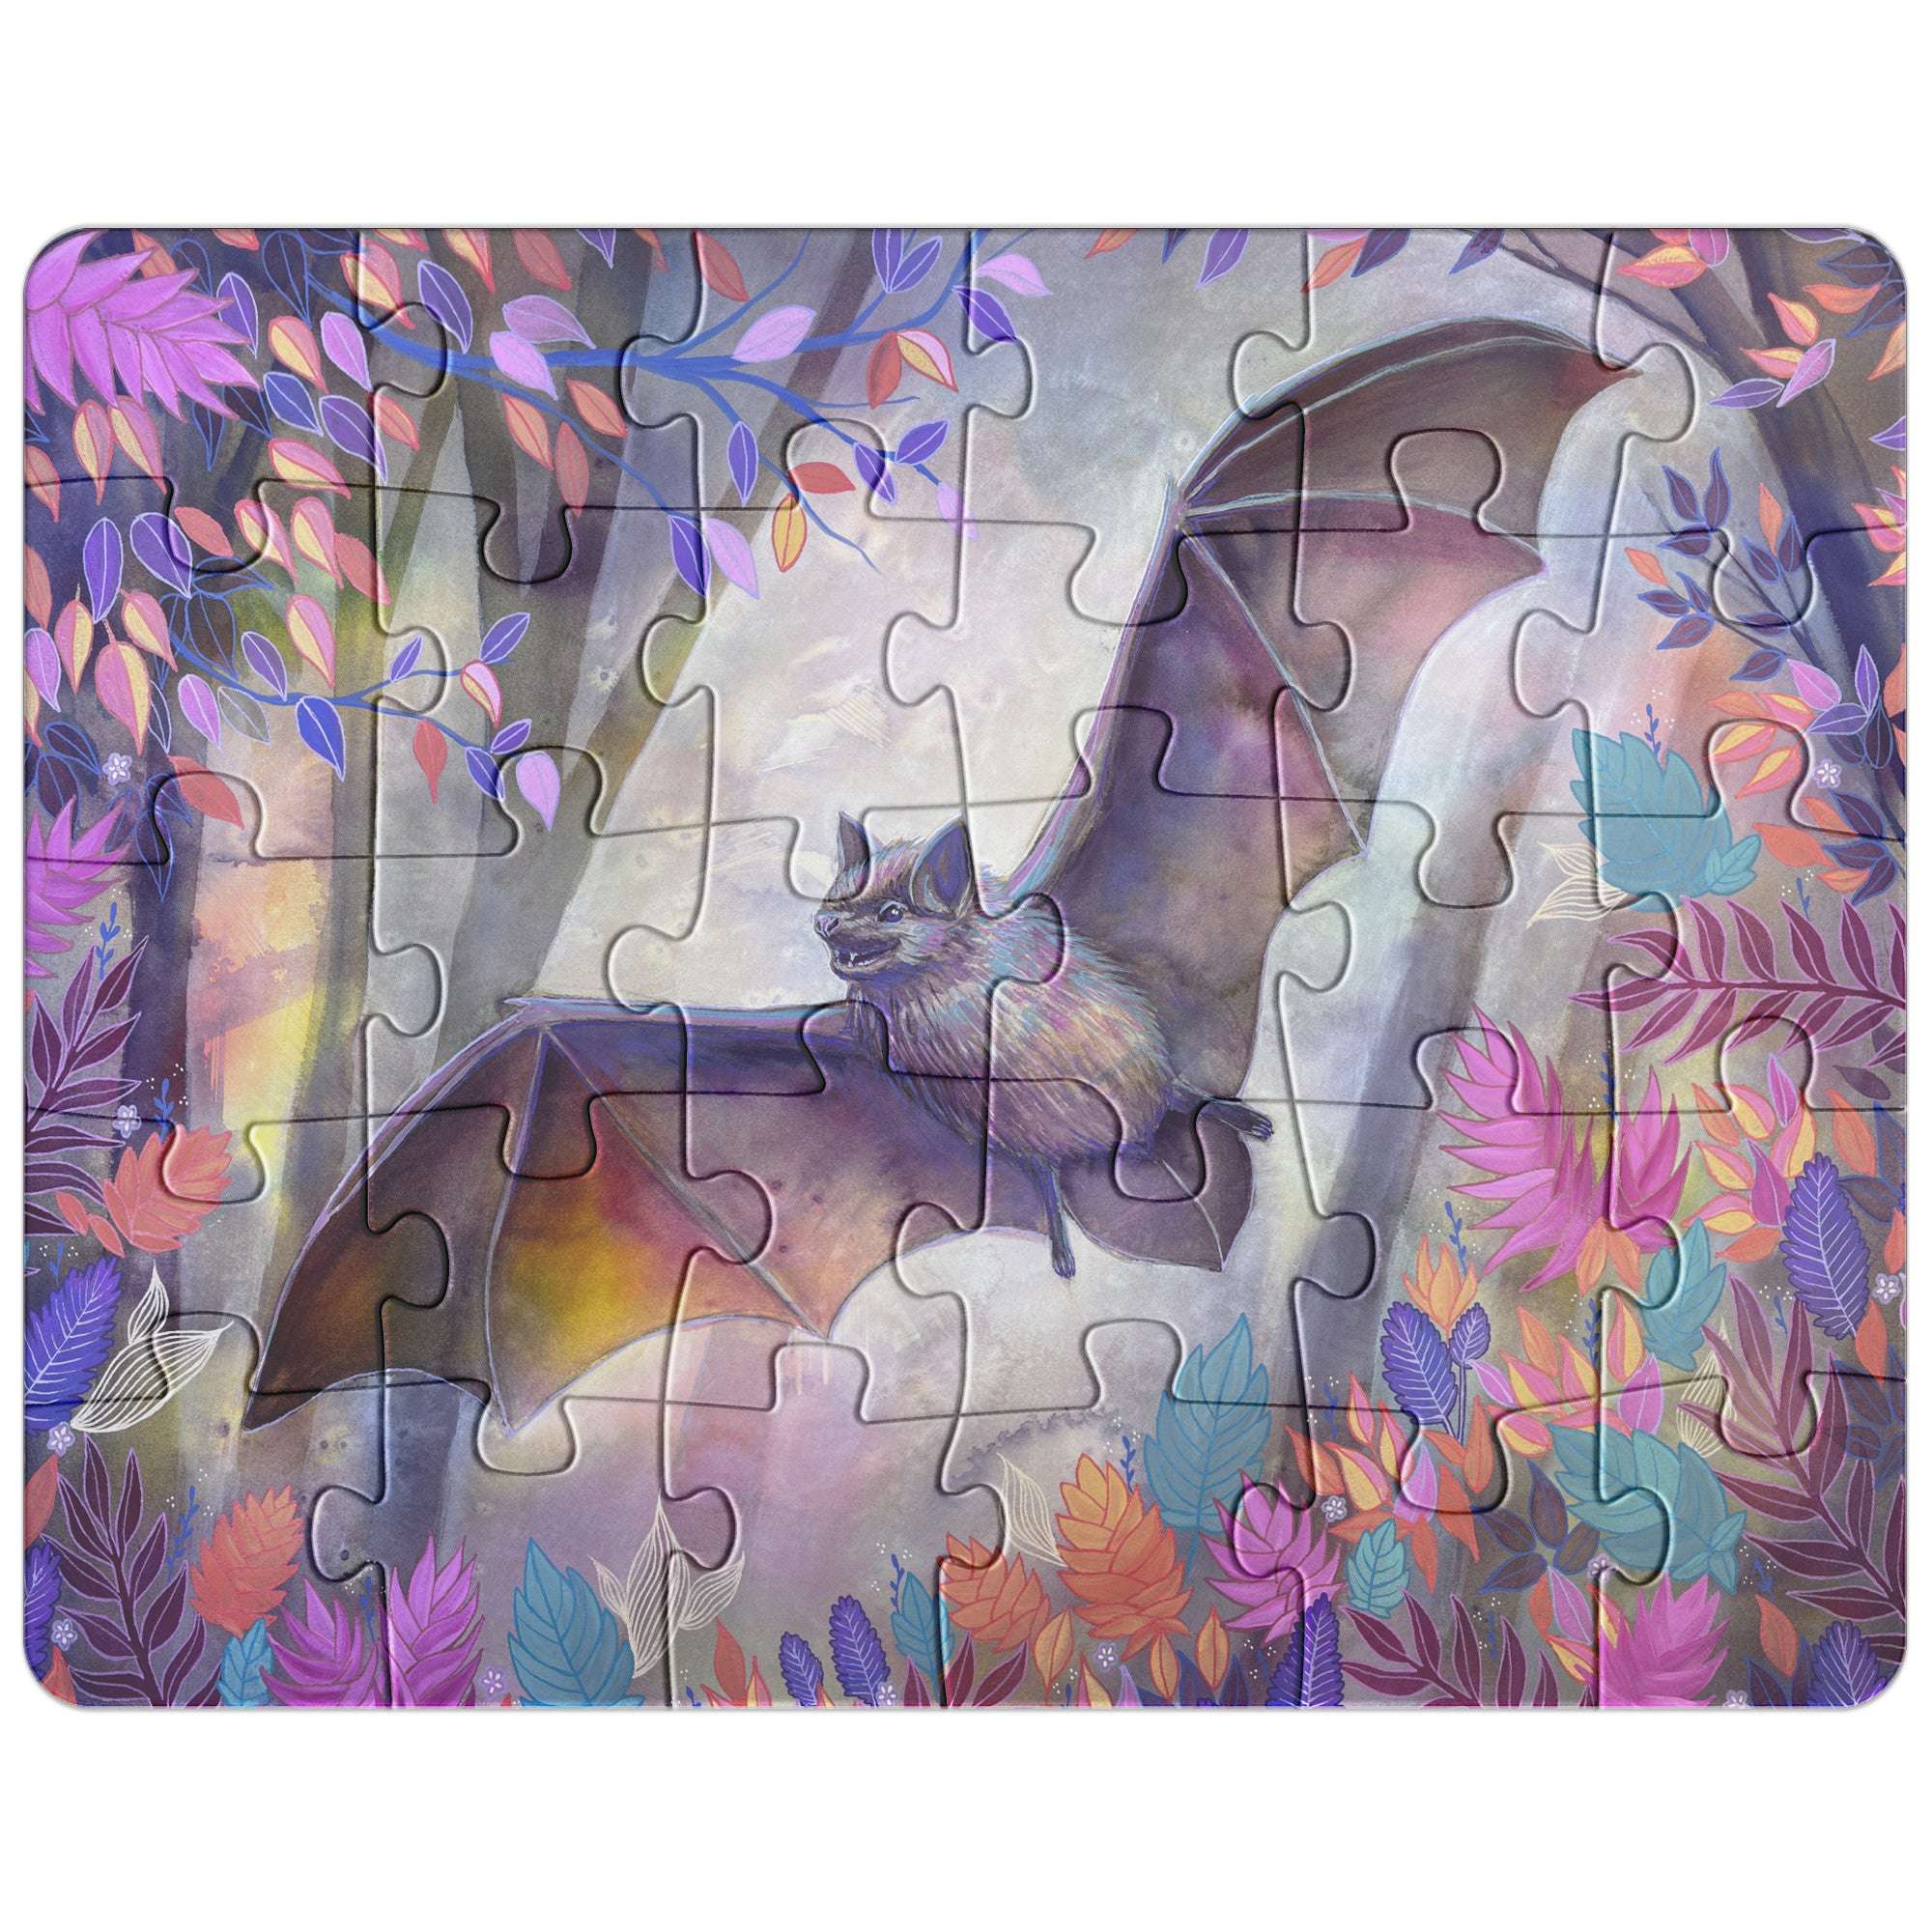 Assembled Bat Puzzle with a vibrant illustration of a bat flying among colorful, stylized leaves and flowers.